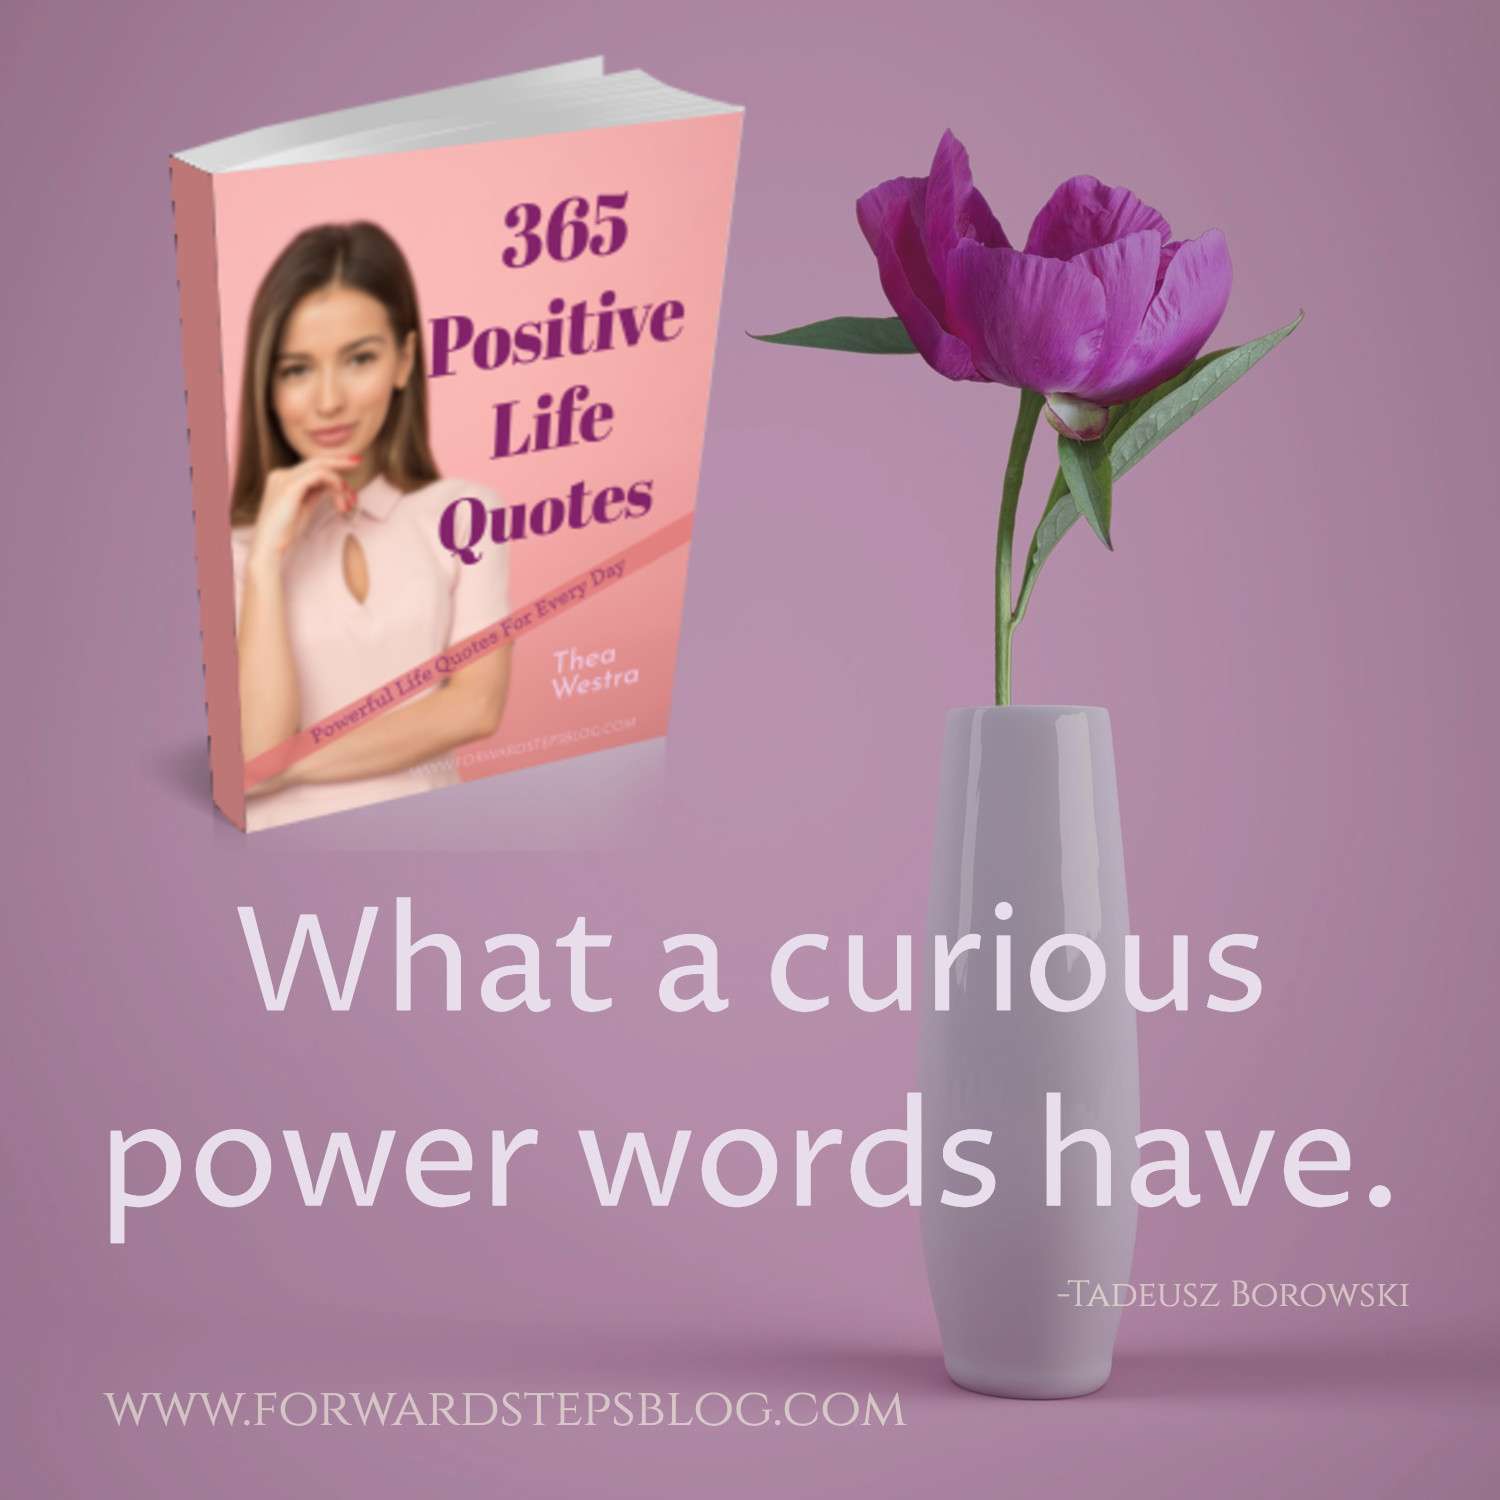 PRODUCT 365 Positive Quotes eBook  <! --- NOTE: original size 1500px X 1500px. Change height & width to scale using https://selfimprovementgift.com/forwardsteps/image-resize/ -- ></noscript>